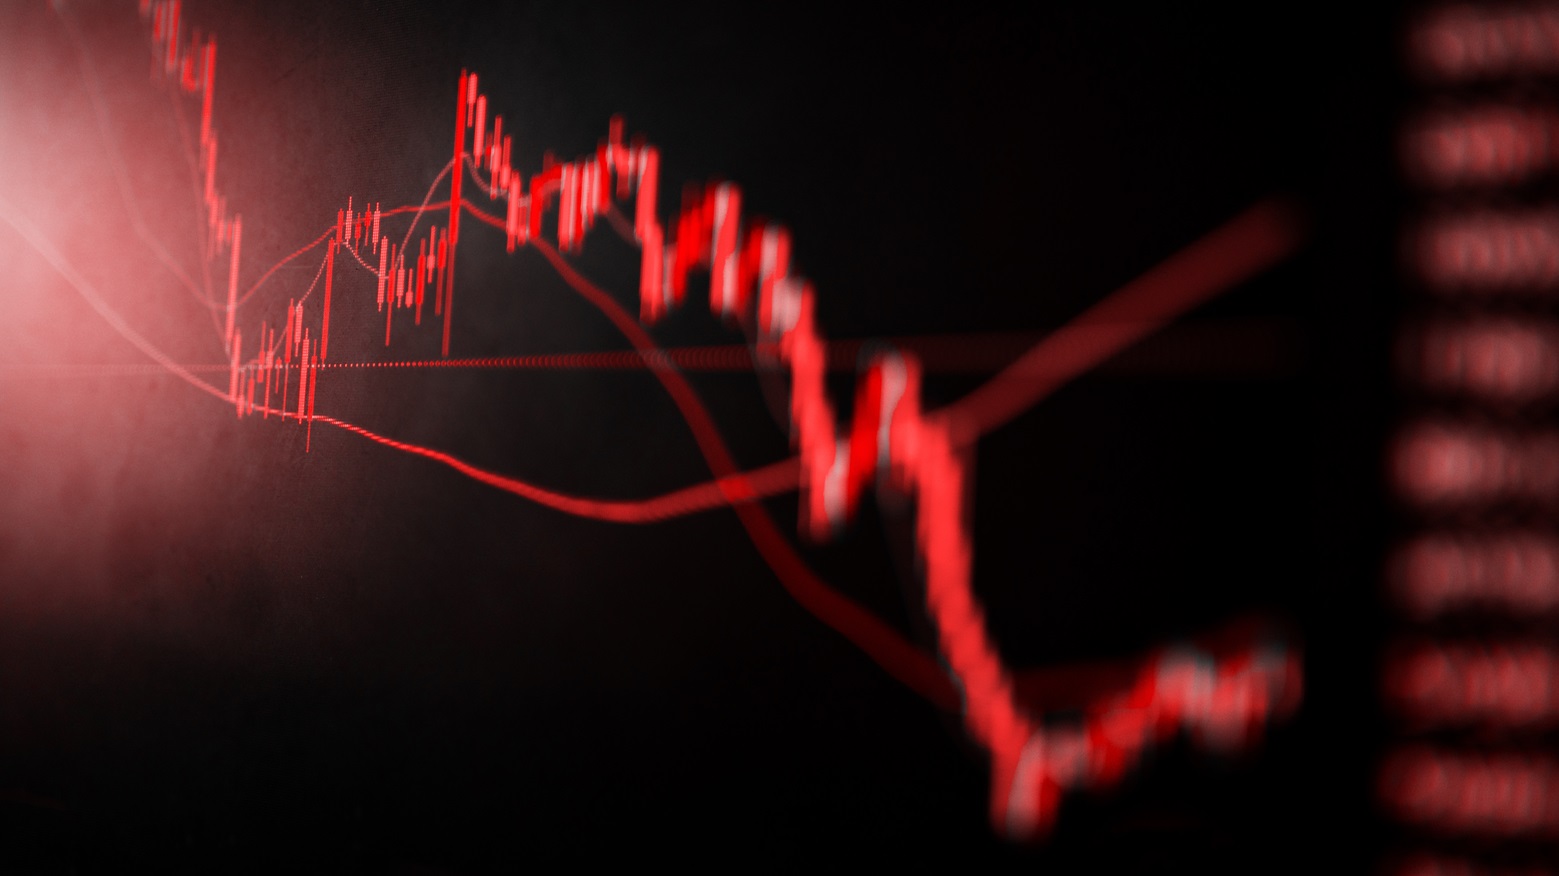 Altcoins Sink Into “Danger Zone”, Is A Correction Incoming?